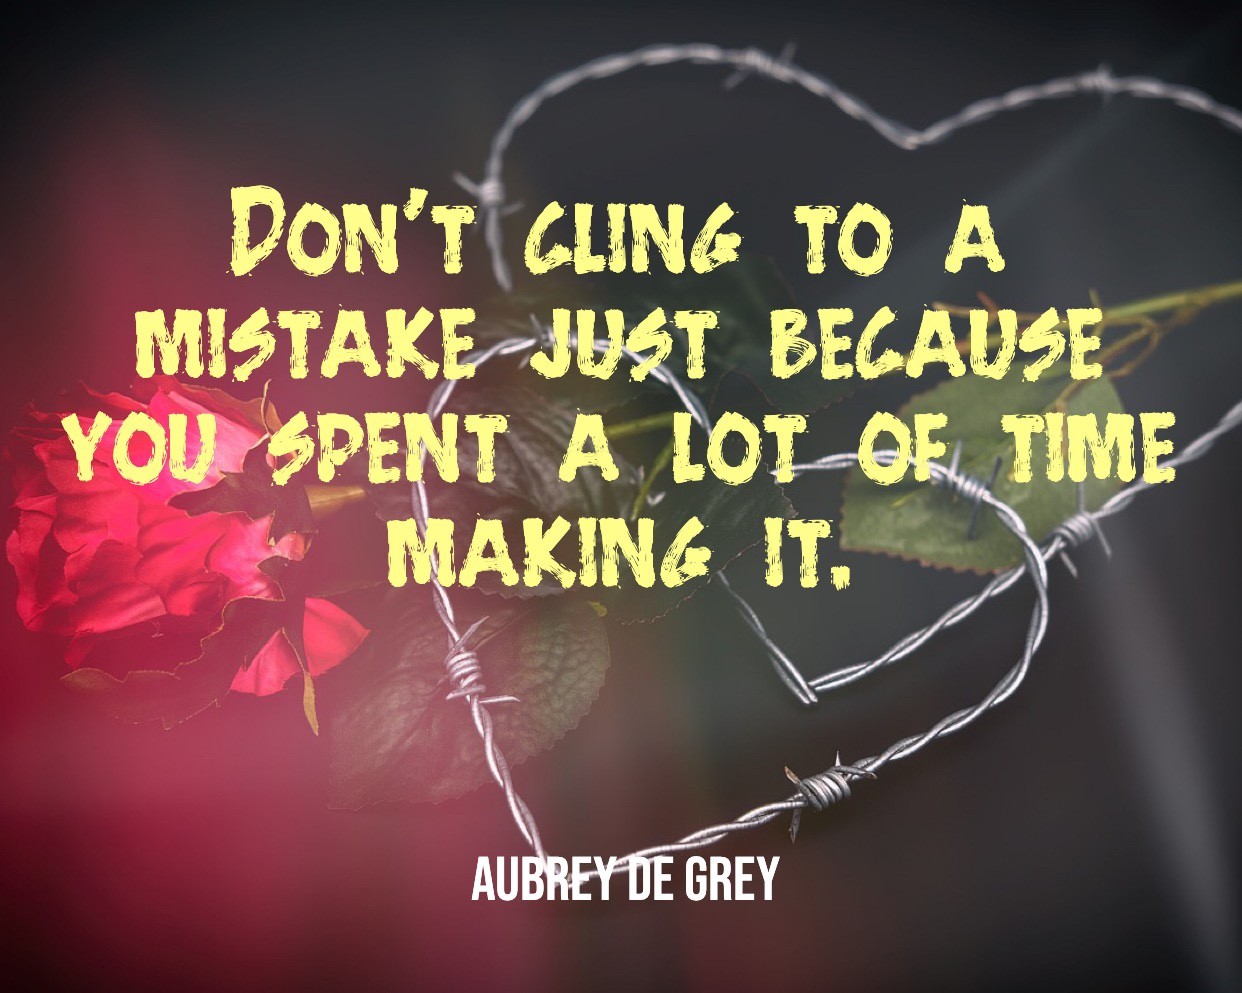 Cling To A Mistake - People Development Magazine